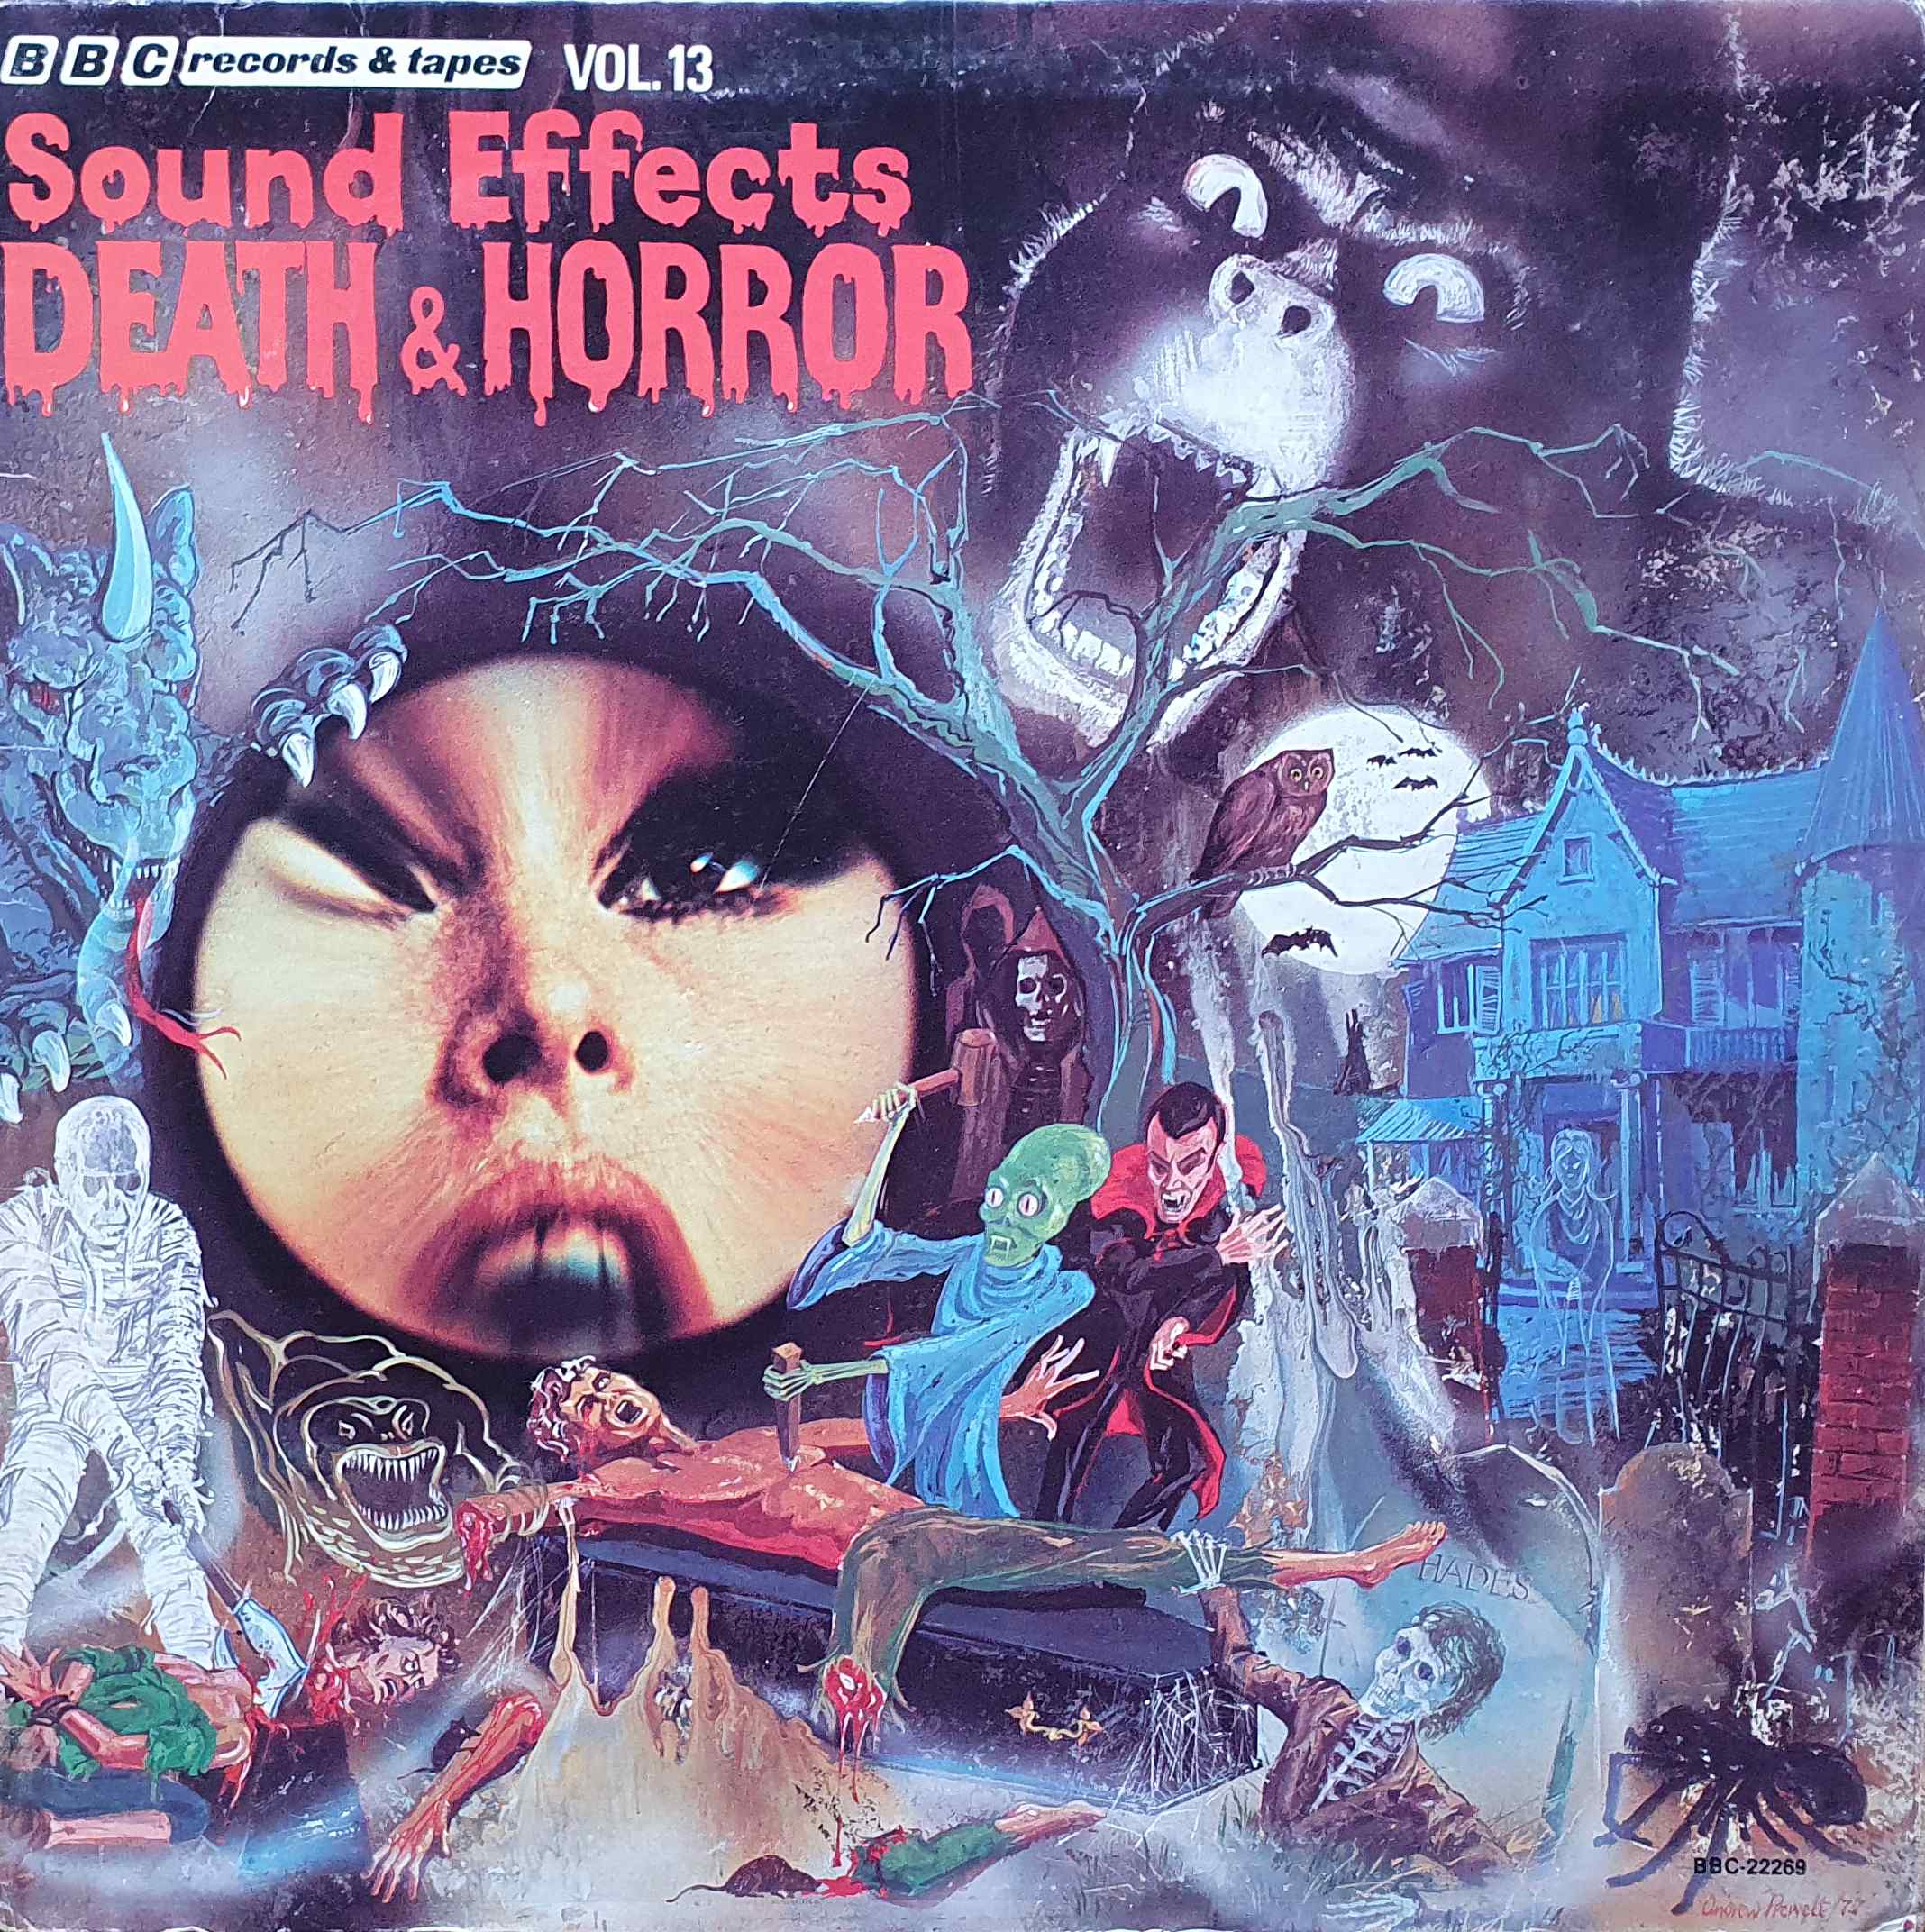 Picture of BBC - 22269 Sound effects no. 13 - Death & horror (US import) by artist Various from the BBC albums - Records and Tapes library